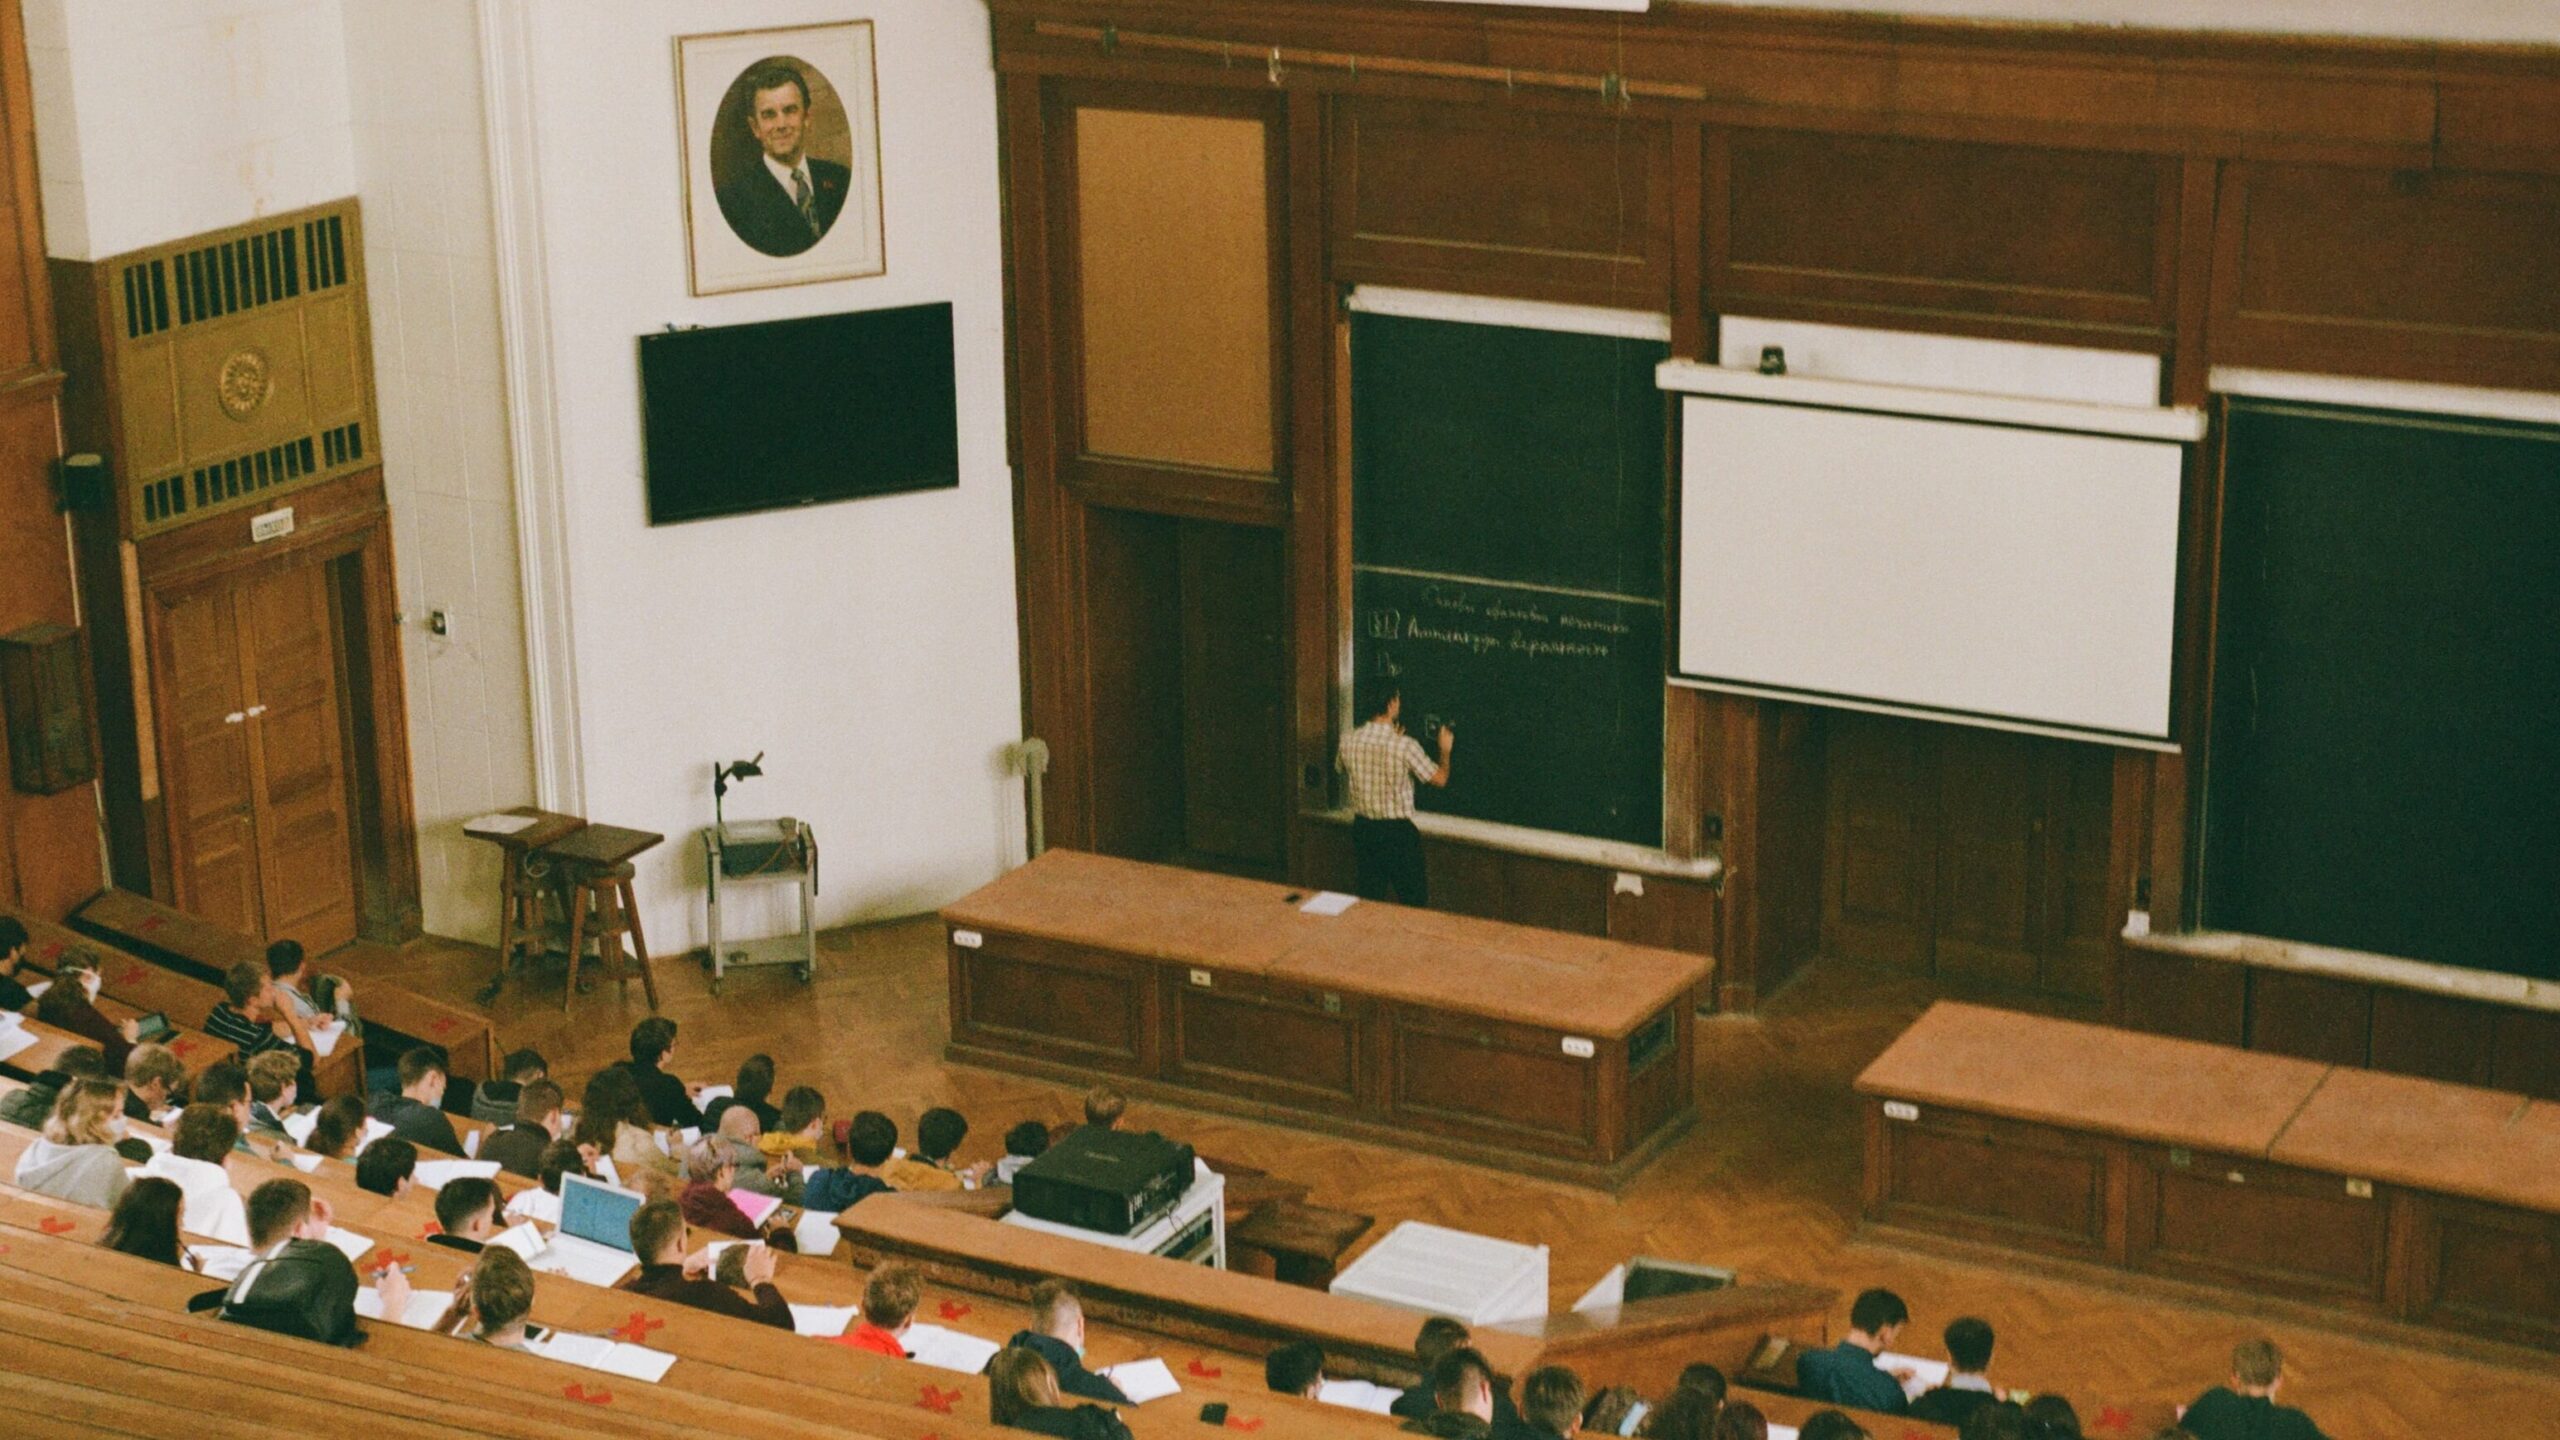 Students attending a lecture in a university classroom